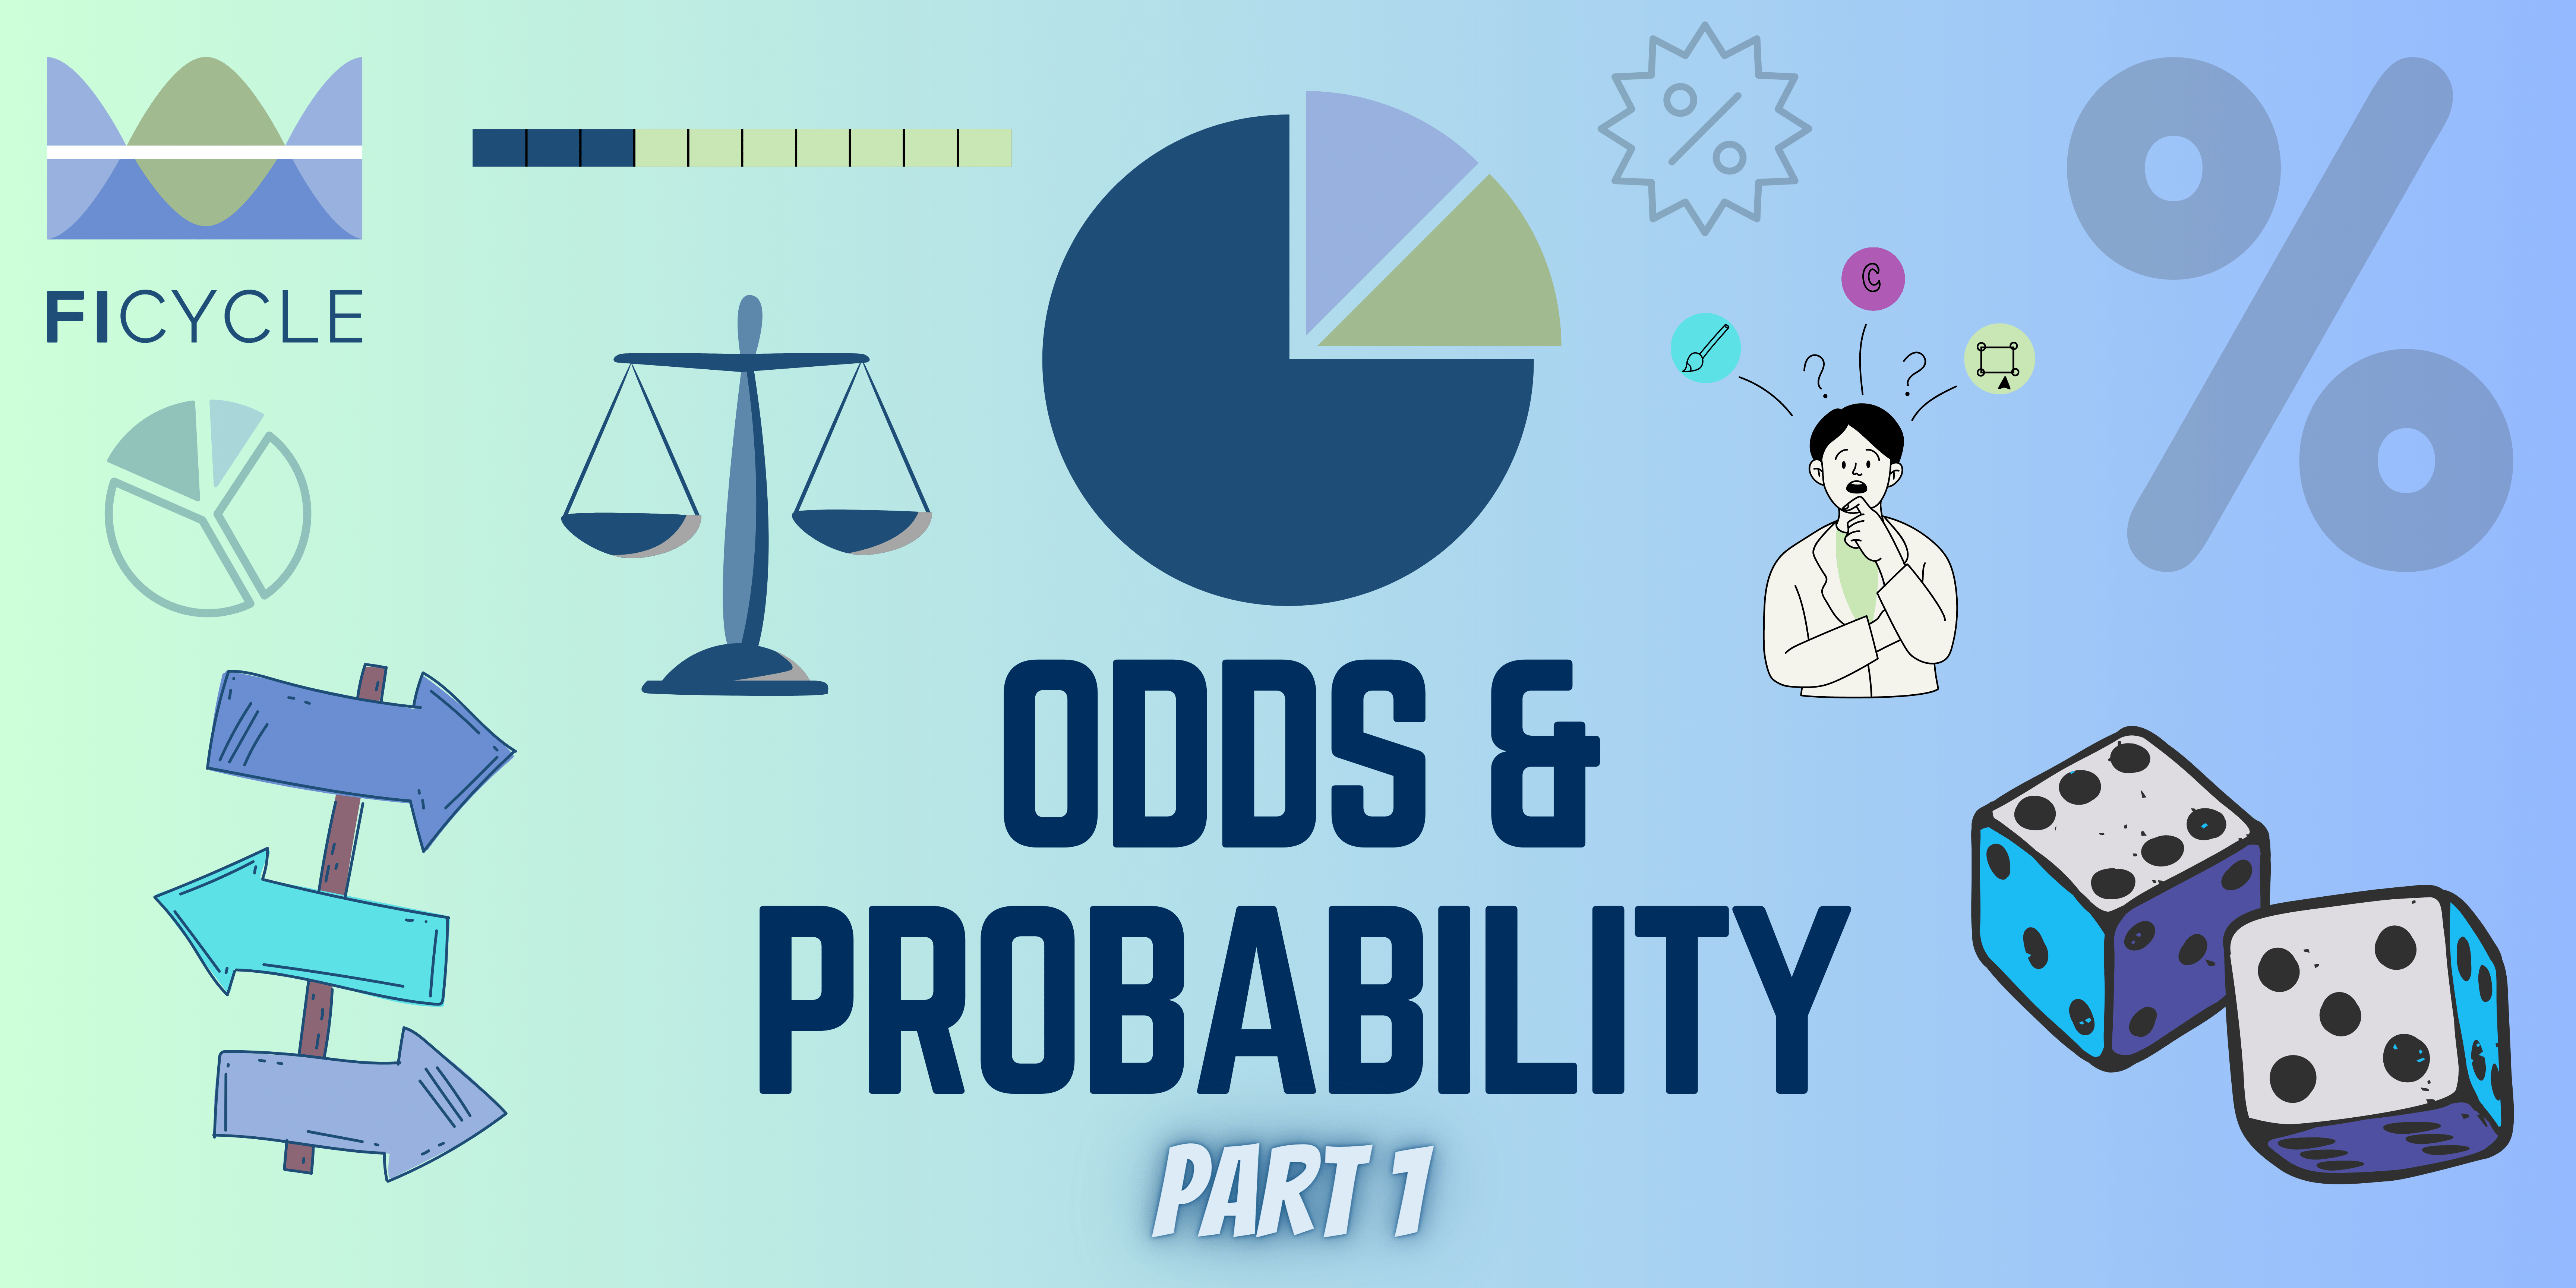 Odds and Probability